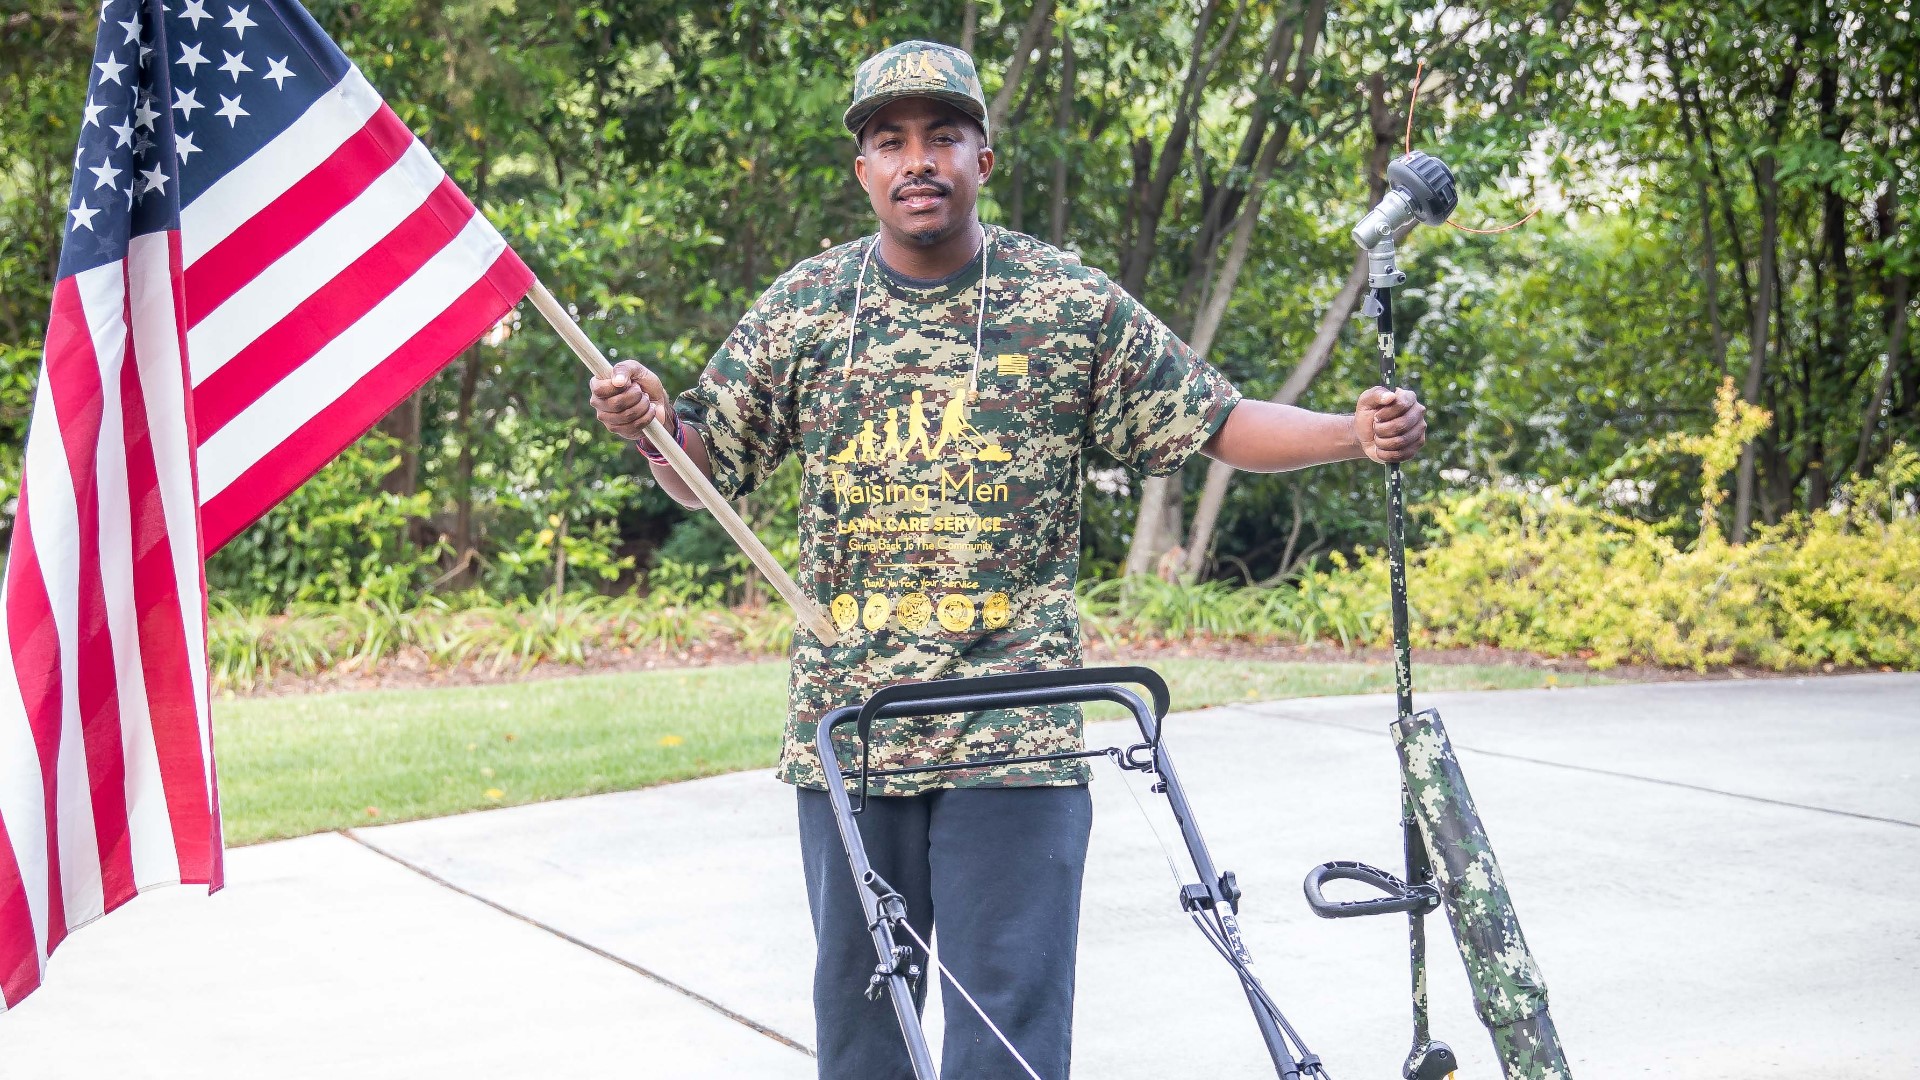 Rodney Smith Jr. has been crisscrossing the country with his lawn mower for the last few years, helping veterans one stop at a time.